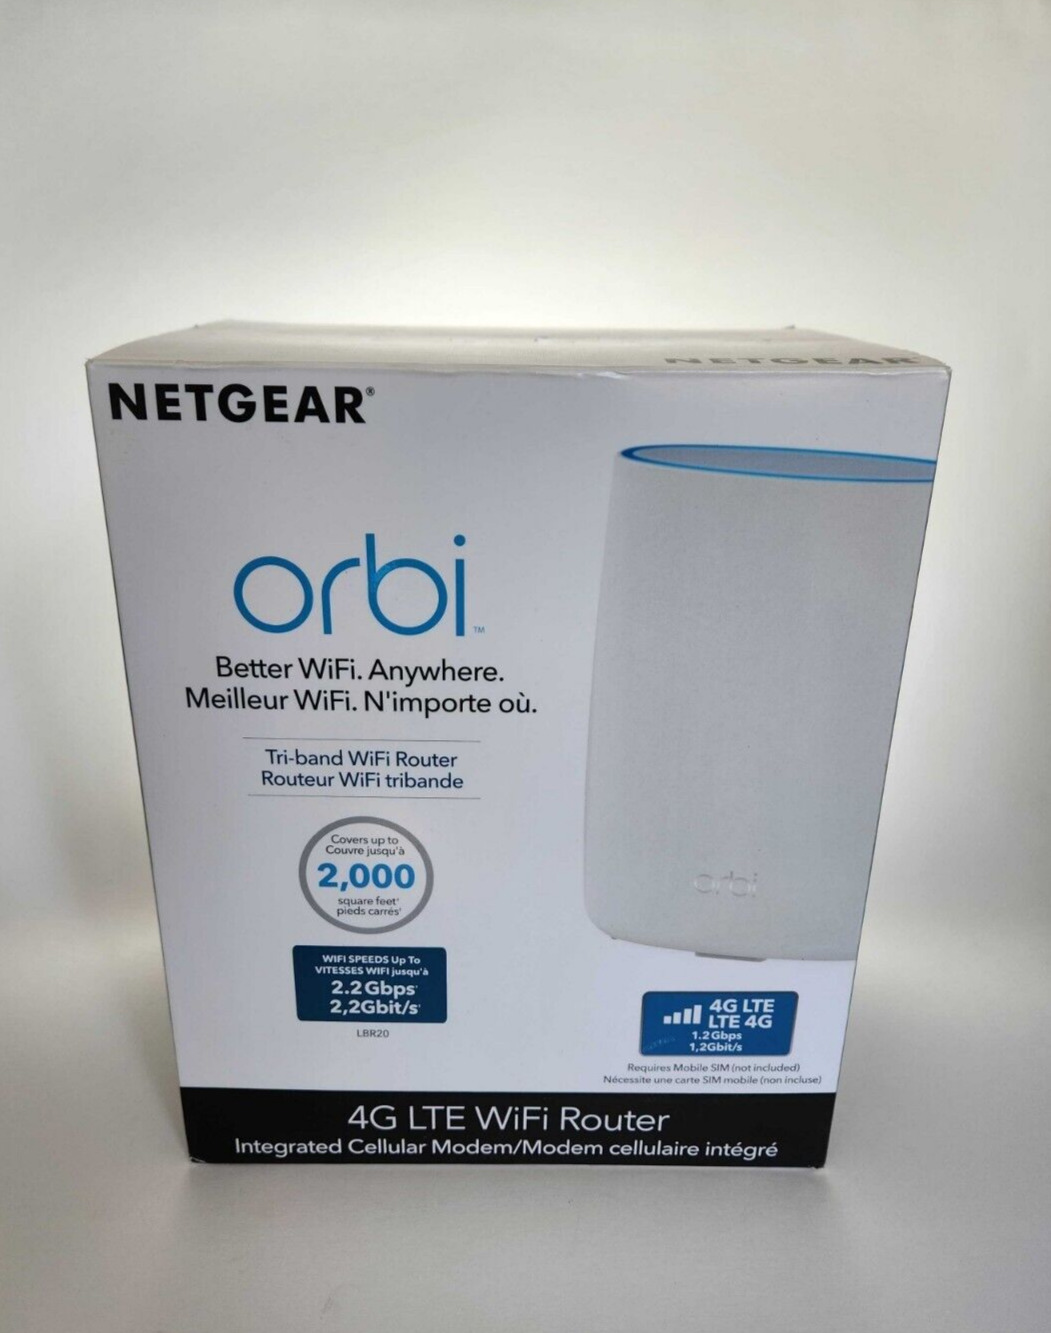 NETGEAR Orbi LBR20 Wifi LTE Router - USED/TESTED